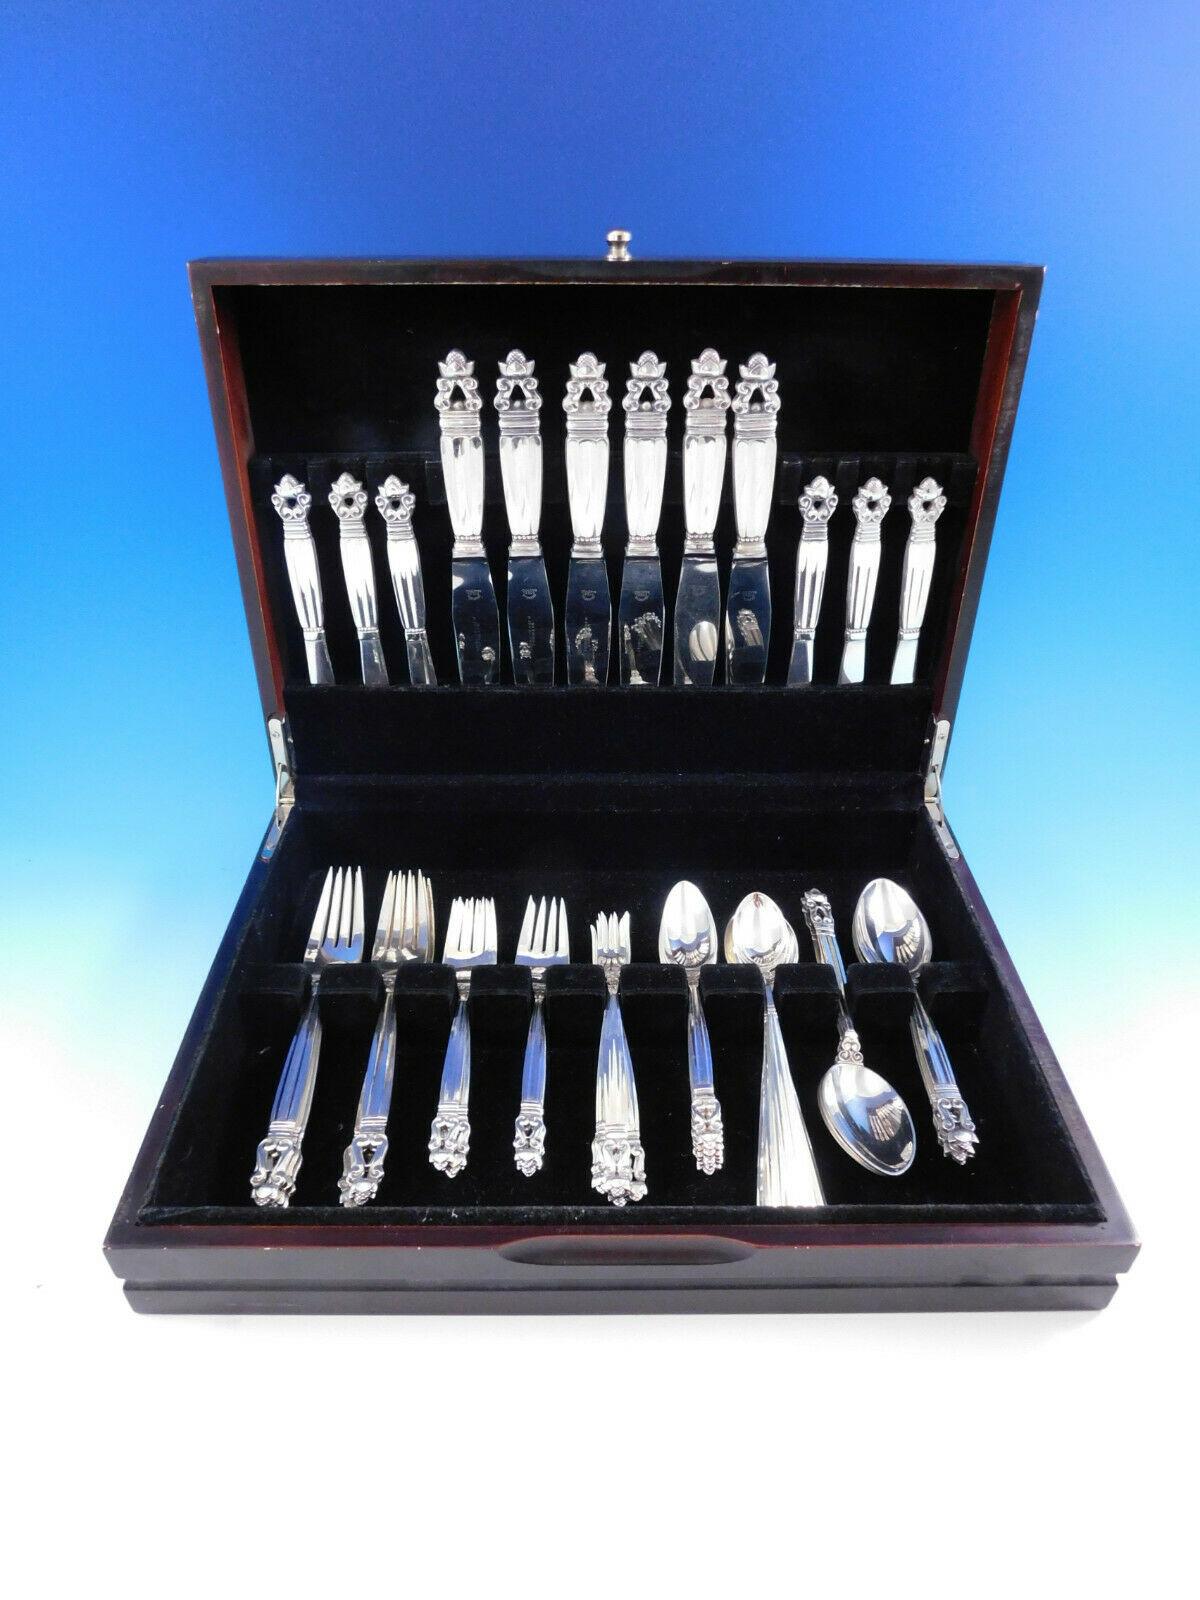 Acorn by Georg Jensen sterling silver dinner size flatware set - 48 pieces. This set includes:

6 dinner knives, short handle, 9 1/8